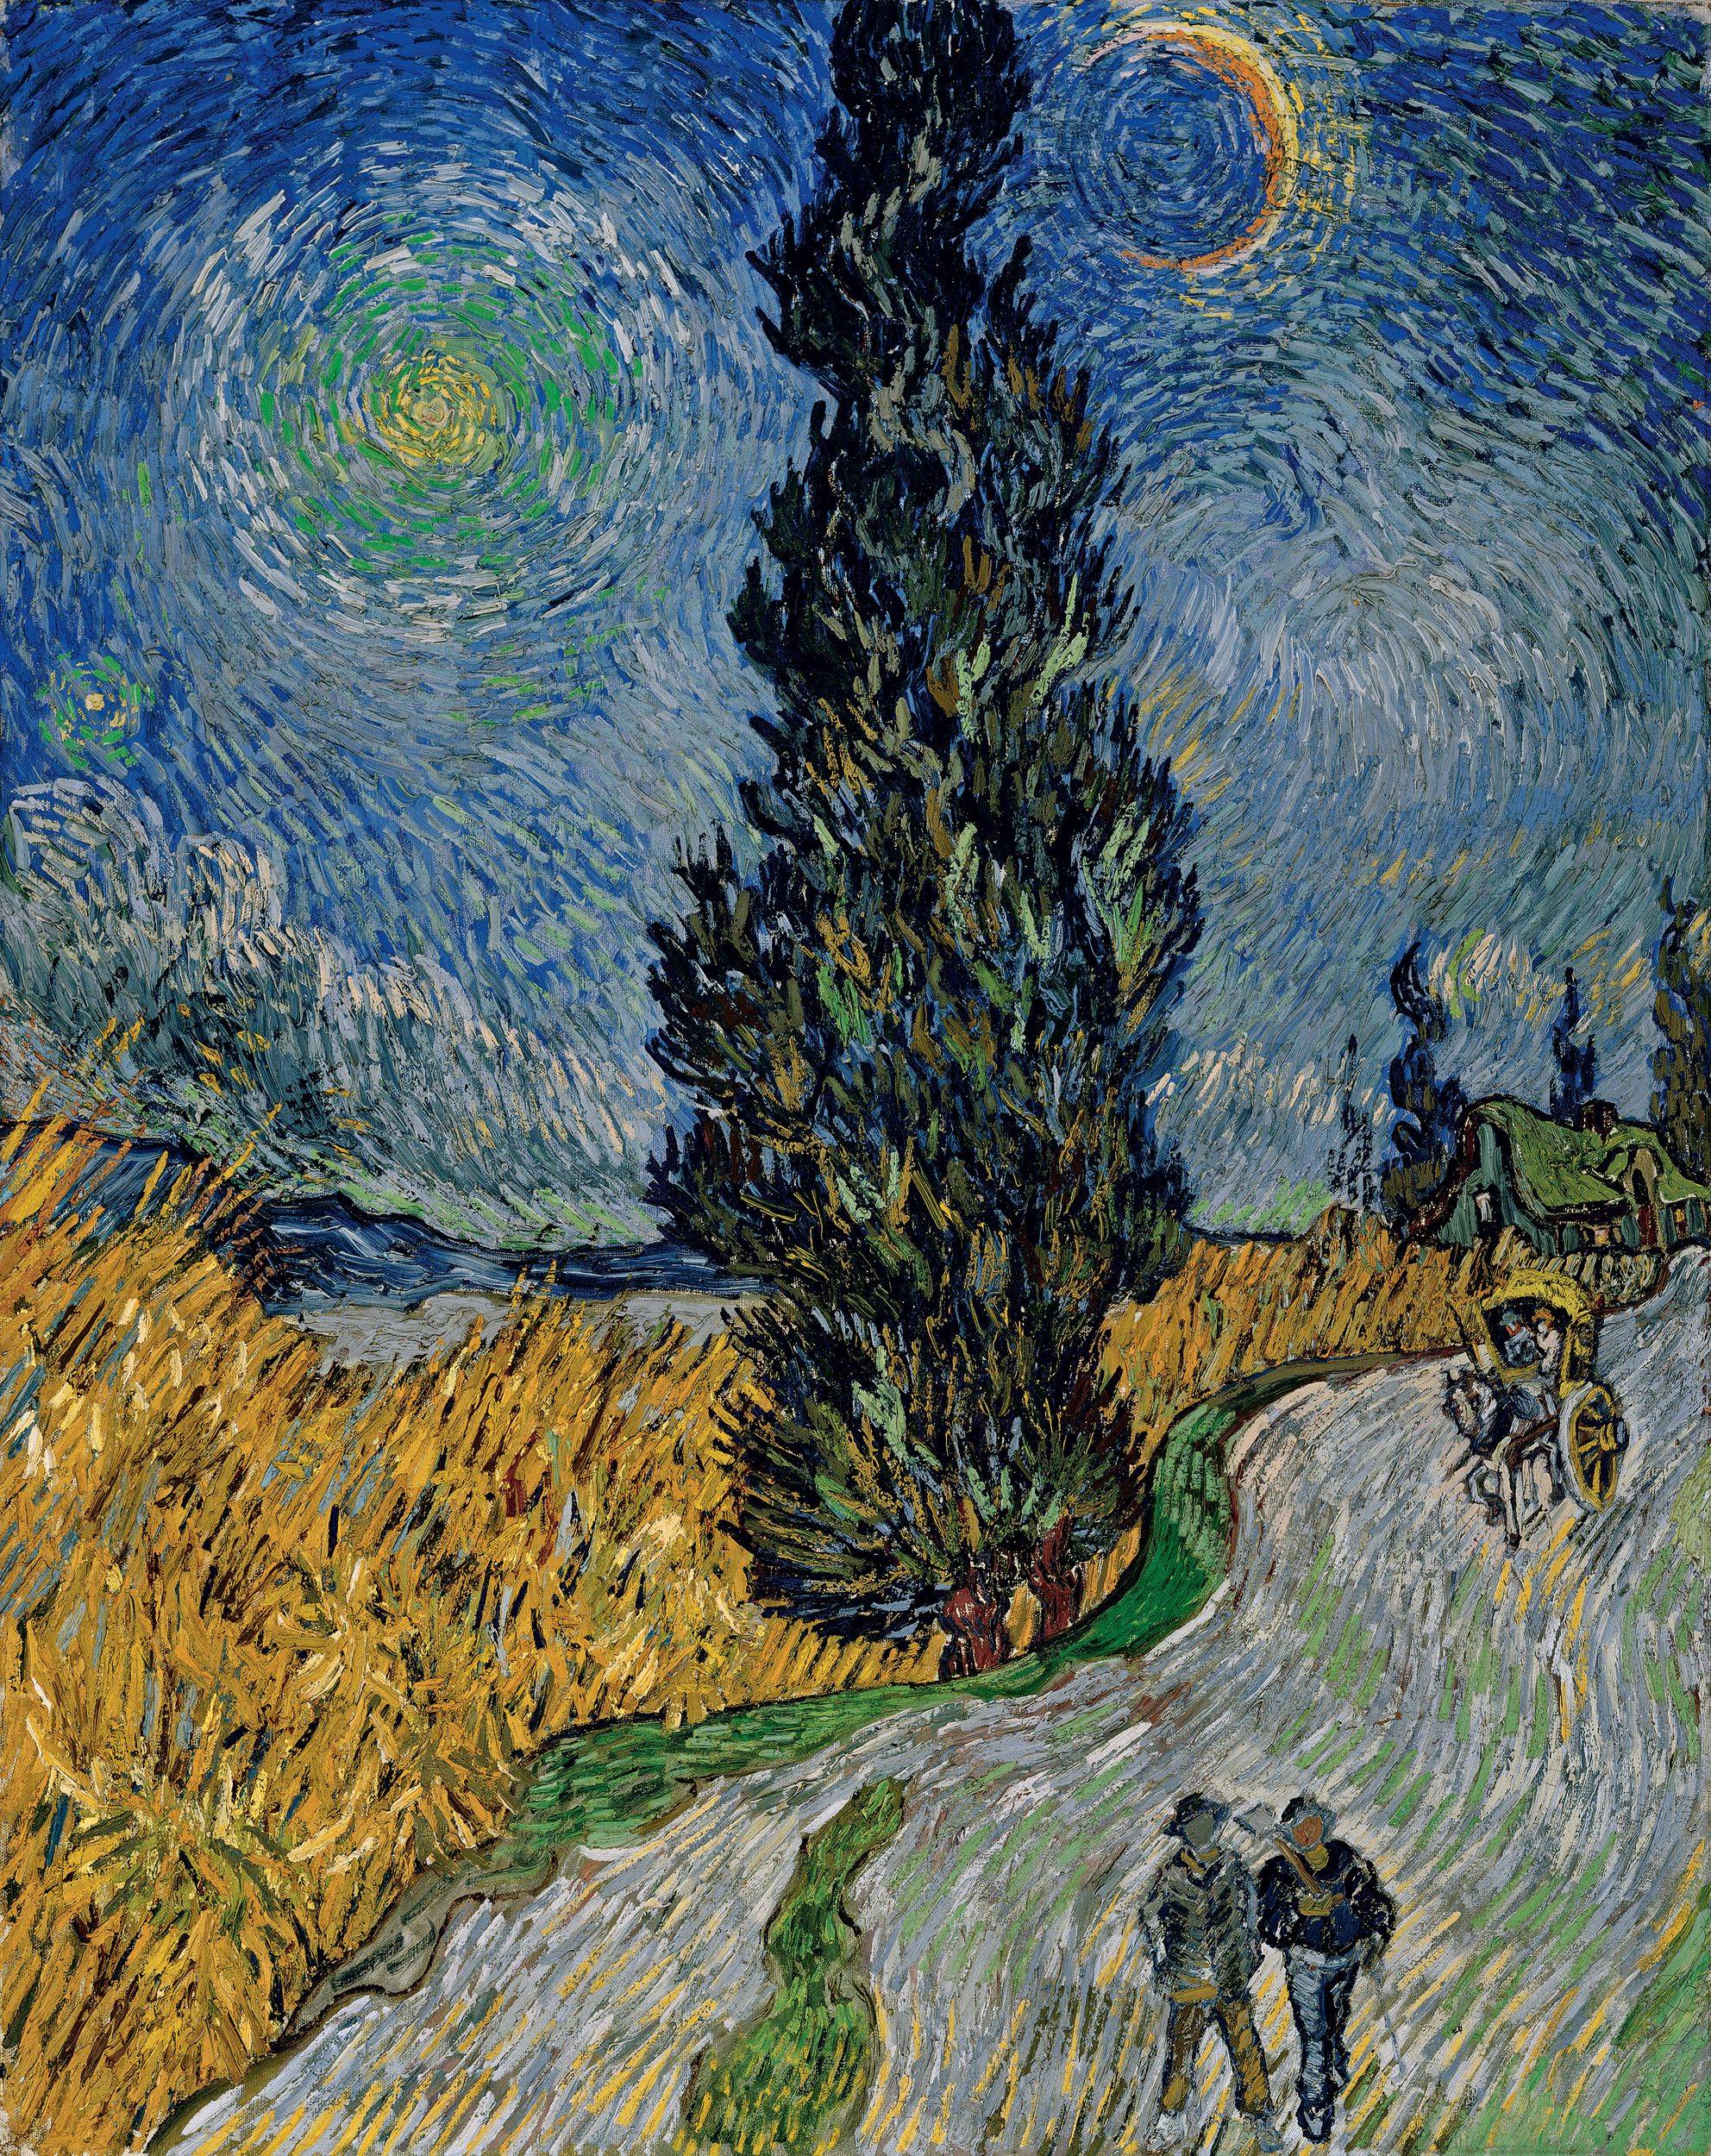 Country Road in Provence by Night by Vincent van Gogh - c. 12 - 15 May 1890 - 90,6 x 72 cm Kröller-Müller Museum